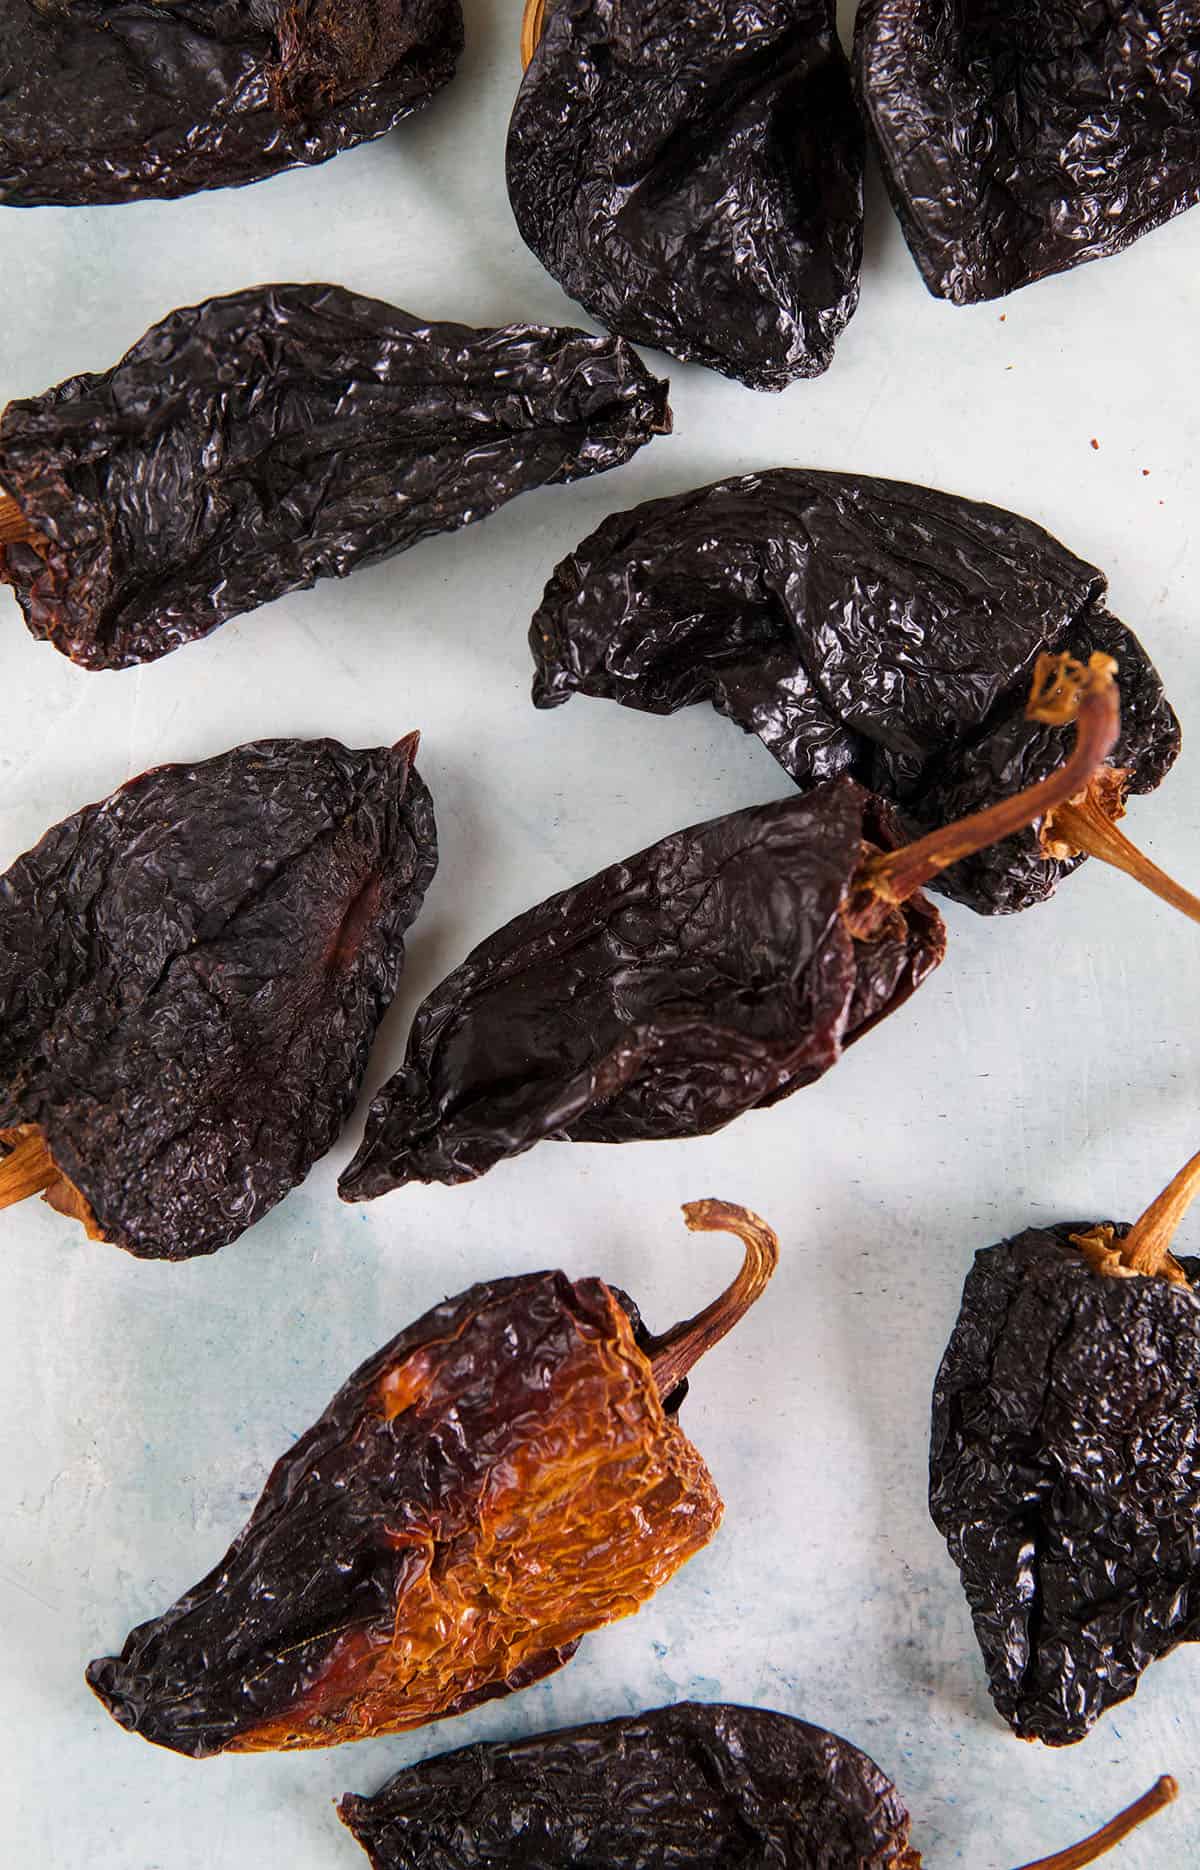 Dried whole ancho chilis are placed on a white surface.